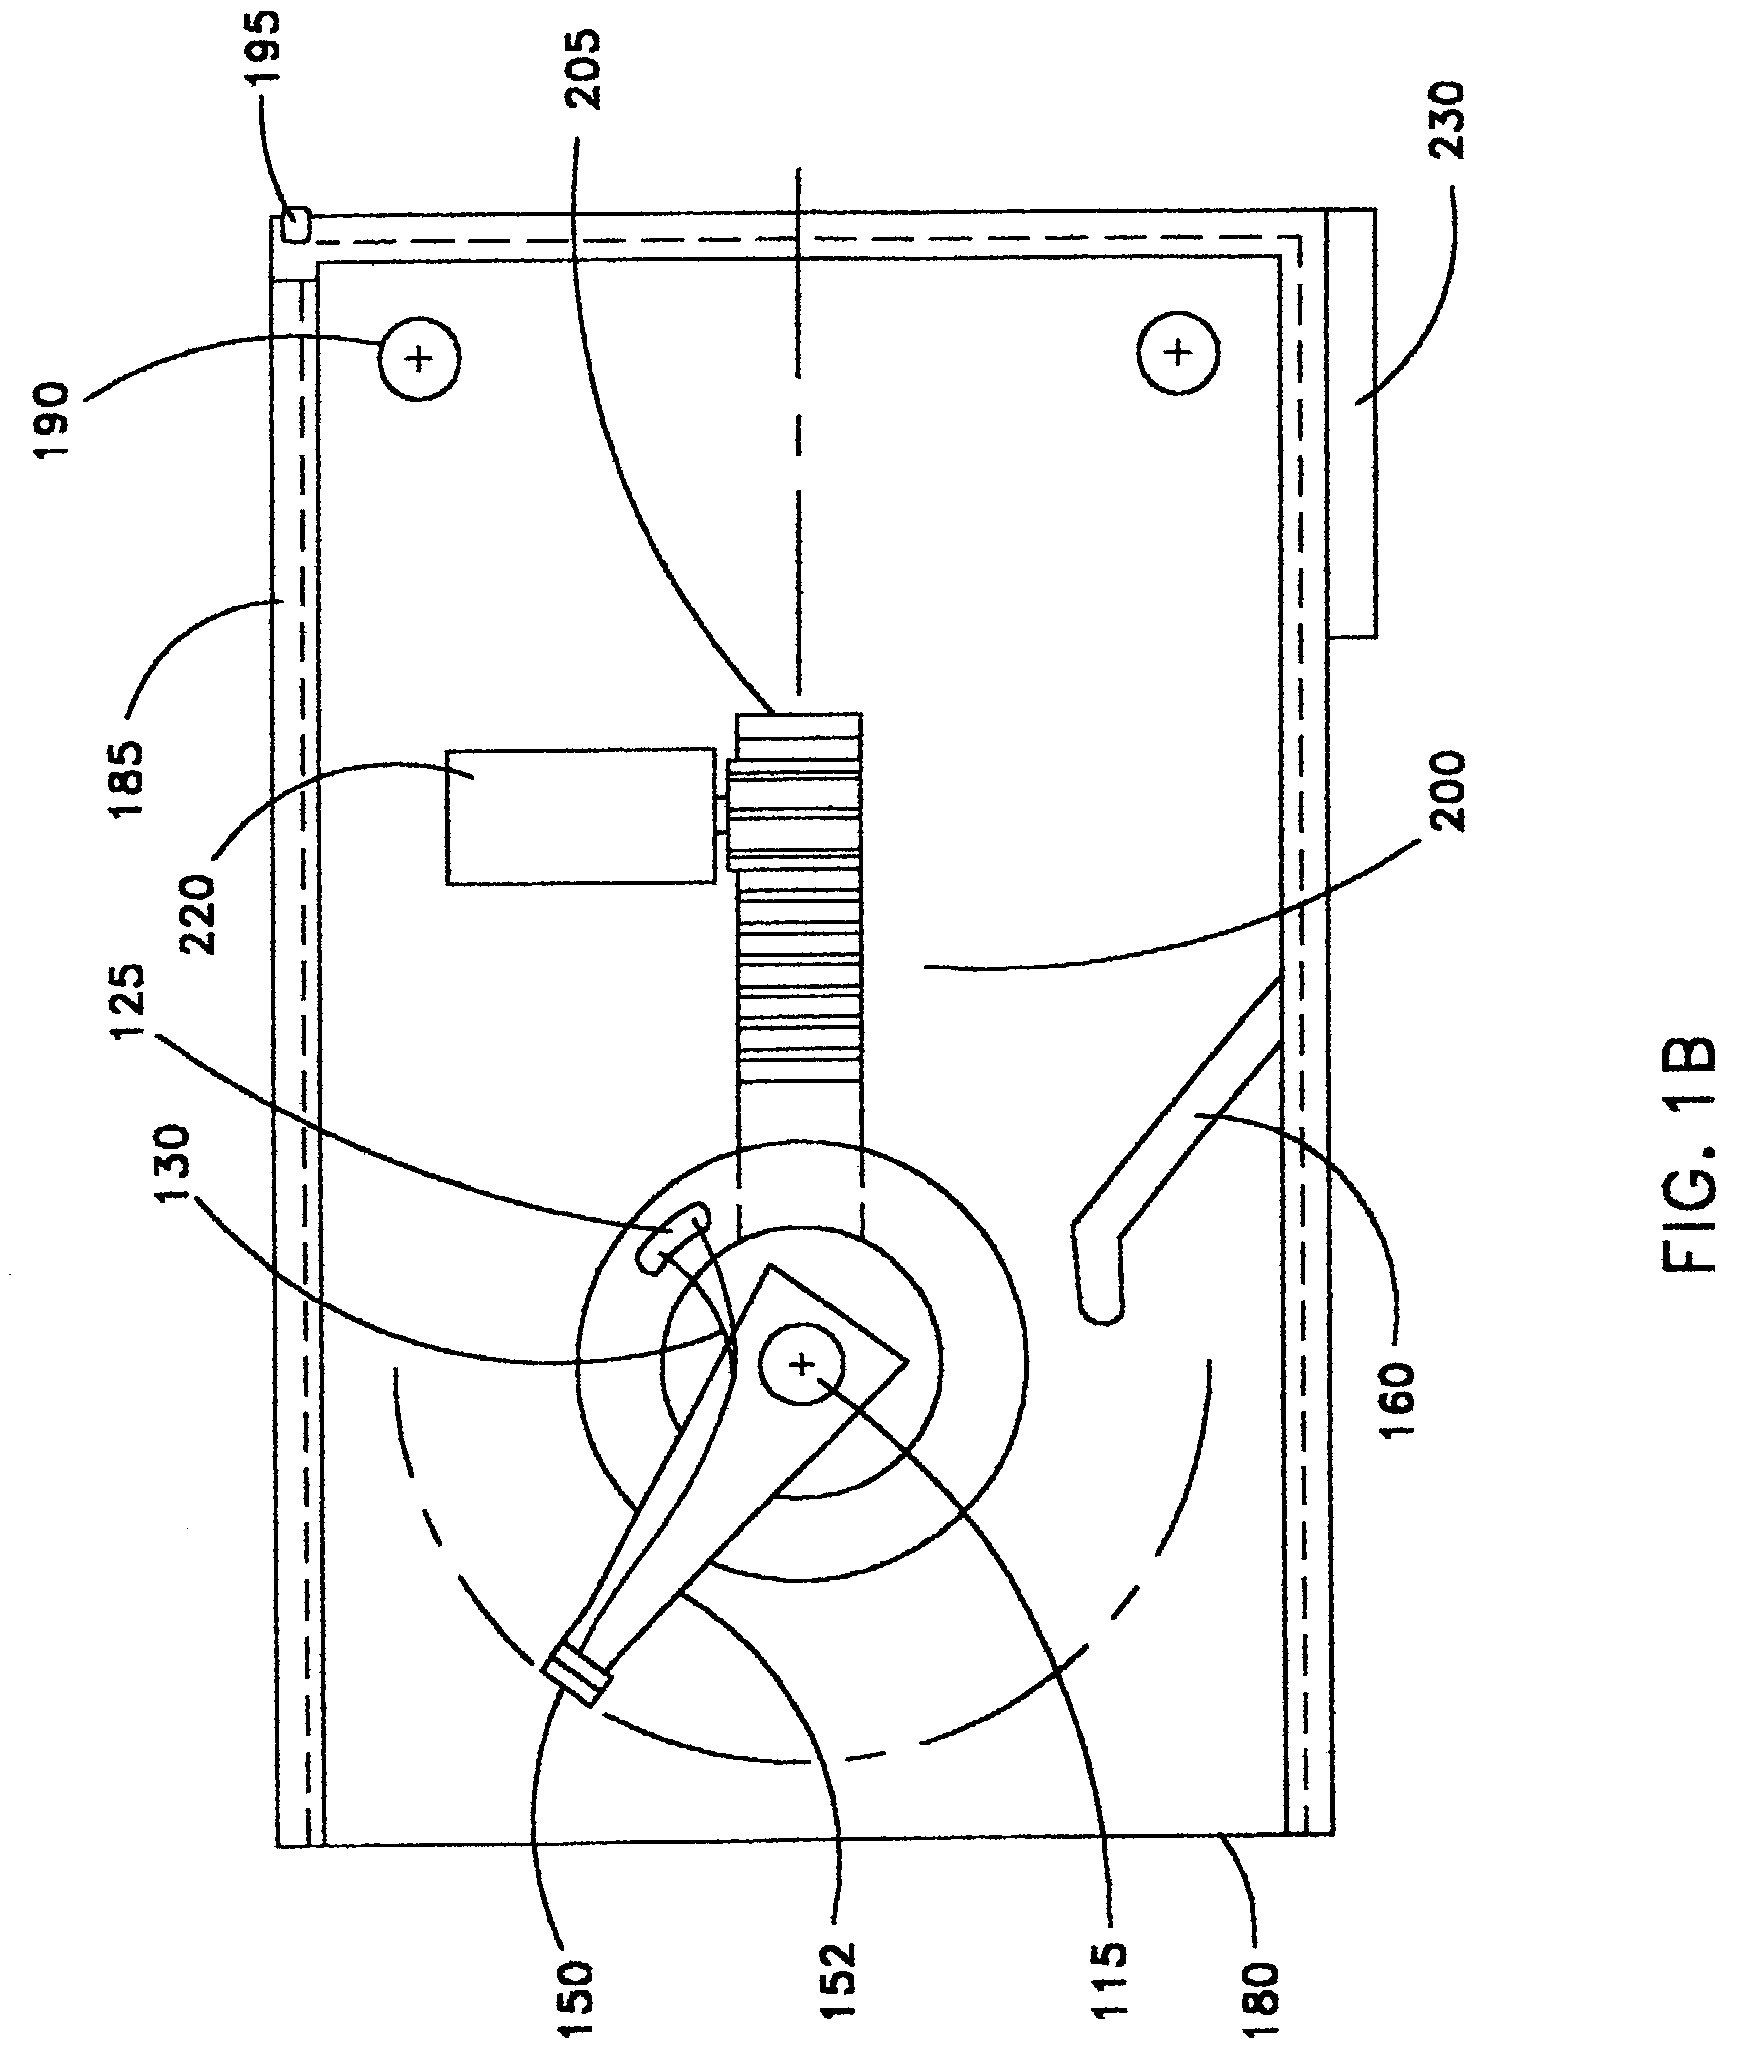 Data access device using rotational head to access data stored in data strips and data arc segments or data circles